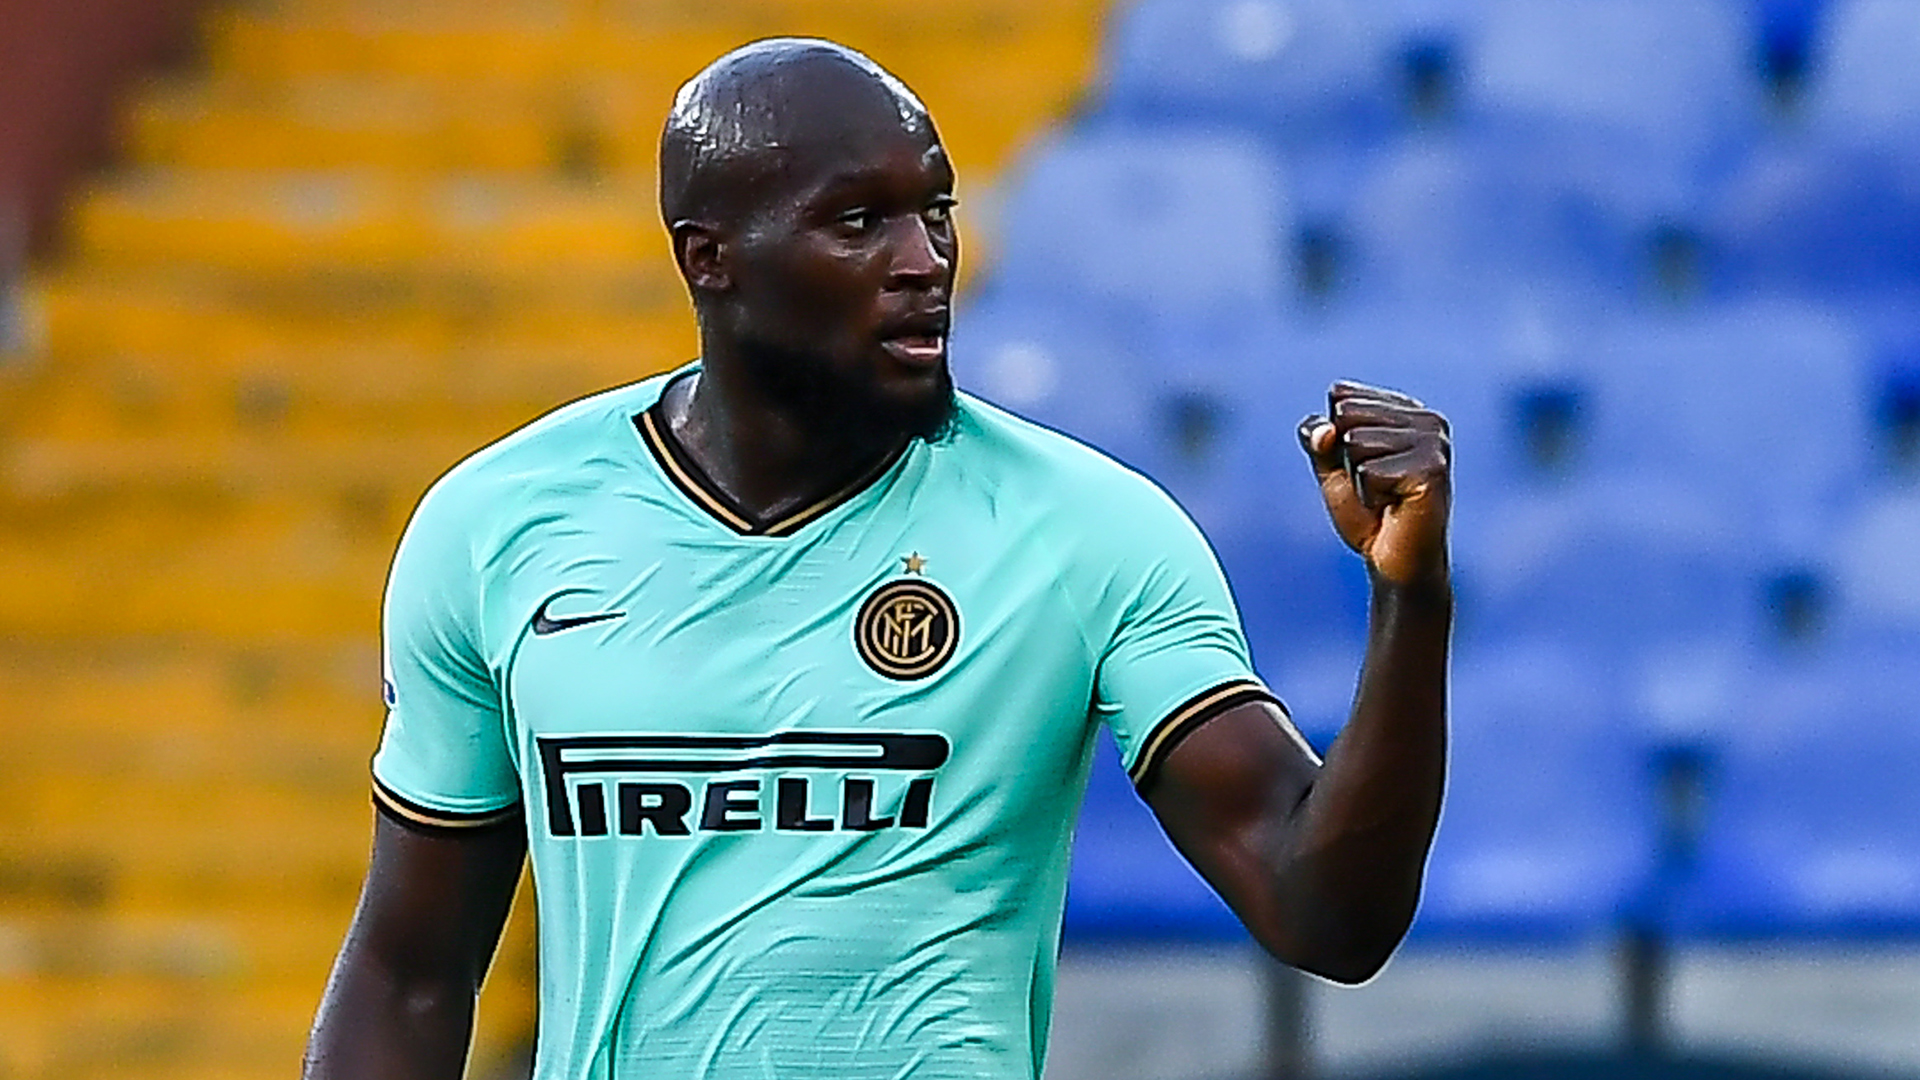 'Inter are going the right way' - Lukaku optimistic after strong finish in Serie A